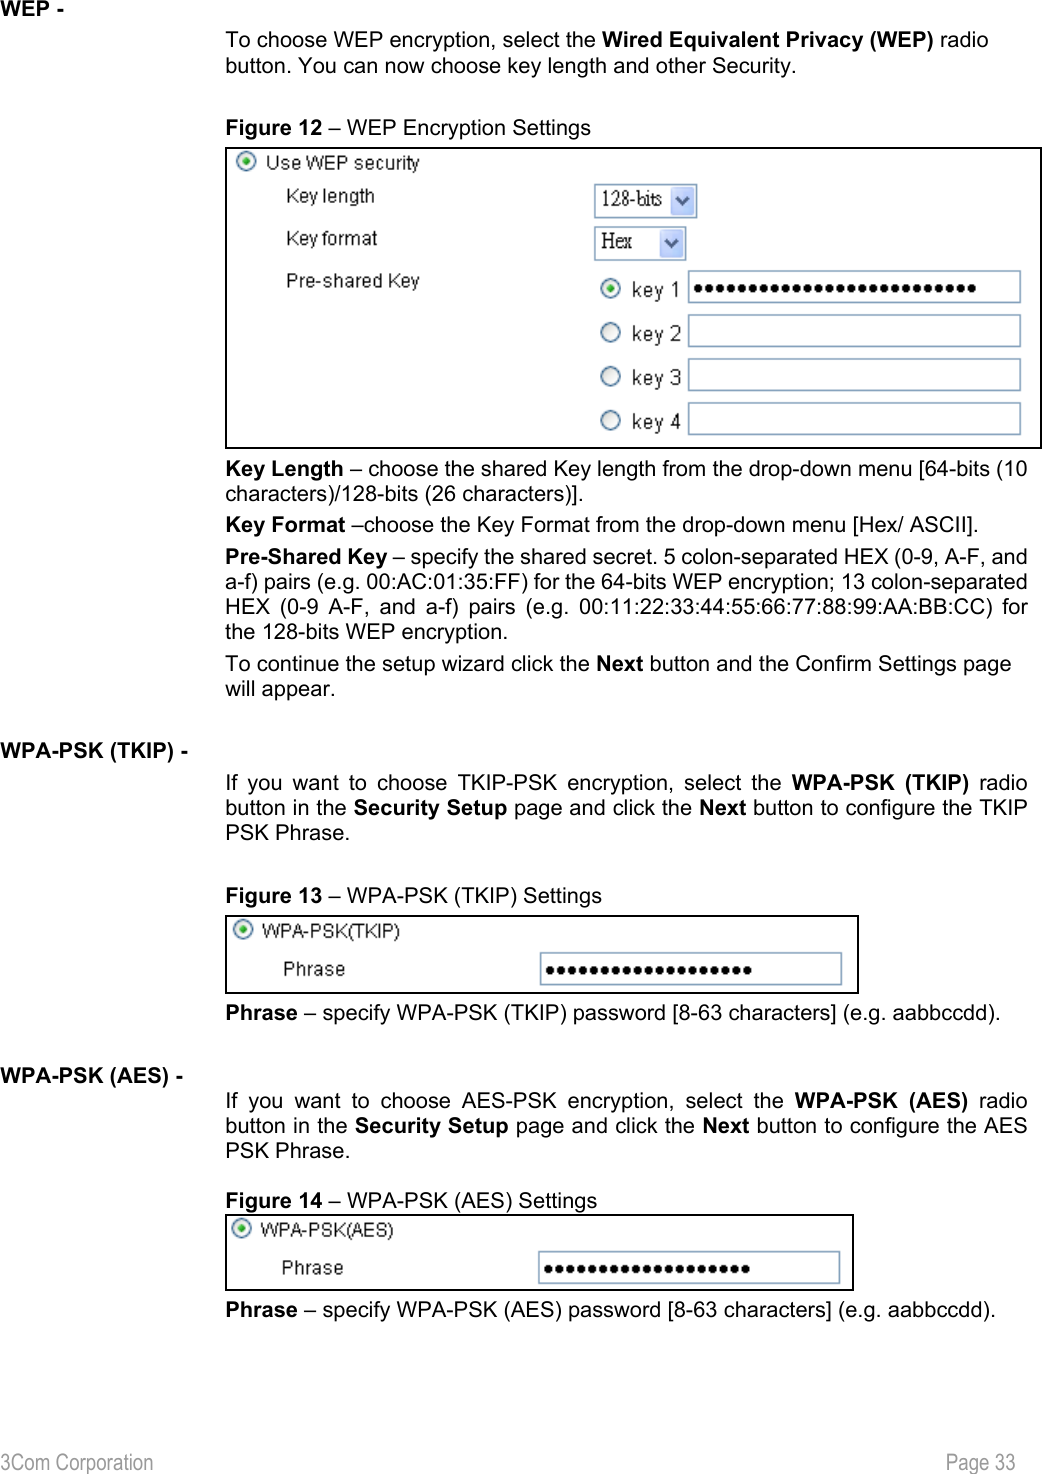 3Com Corporation           Page 33  WEP - To choose WEP encryption, select the Wired Equivalent Privacy (WEP) radio button. You can now choose key length and other Security.  Figure 12 – WEP Encryption Settings  Key Length – choose the shared Key length from the drop-down menu [64-bits (10 characters)/128-bits (26 characters)]. Key Format –choose the Key Format from the drop-down menu [Hex/ ASCII]. Pre-Shared Key – specify the shared secret. 5 colon-separated HEX (0-9, A-F, and a-f) pairs (e.g. 00:AC:01:35:FF) for the 64-bits WEP encryption; 13 colon-separated HEX (0-9 A-F, and a-f) pairs (e.g. 00:11:22:33:44:55:66:77:88:99:AA:BB:CC) for the 128-bits WEP encryption. To continue the setup wizard click the Next button and the Confirm Settings page will appear.  WPA-PSK (TKIP) - If you want to choose TKIP-PSK encryption, select the WPA-PSK (TKIP) radio button in the Security Setup page and click the Next button to configure the TKIP PSK Phrase.  Figure 13 – WPA-PSK (TKIP) Settings  Phrase – specify WPA-PSK (TKIP) password [8-63 characters] (e.g. aabbccdd).    WPA-PSK (AES) - If you want to choose AES-PSK encryption, select the WPA-PSK (AES) radio button in the Security Setup page and click the Next button to configure the AES PSK Phrase.  Figure 14 – WPA-PSK (AES) Settings  Phrase – specify WPA-PSK (AES) password [8-63 characters] (e.g. aabbccdd). 